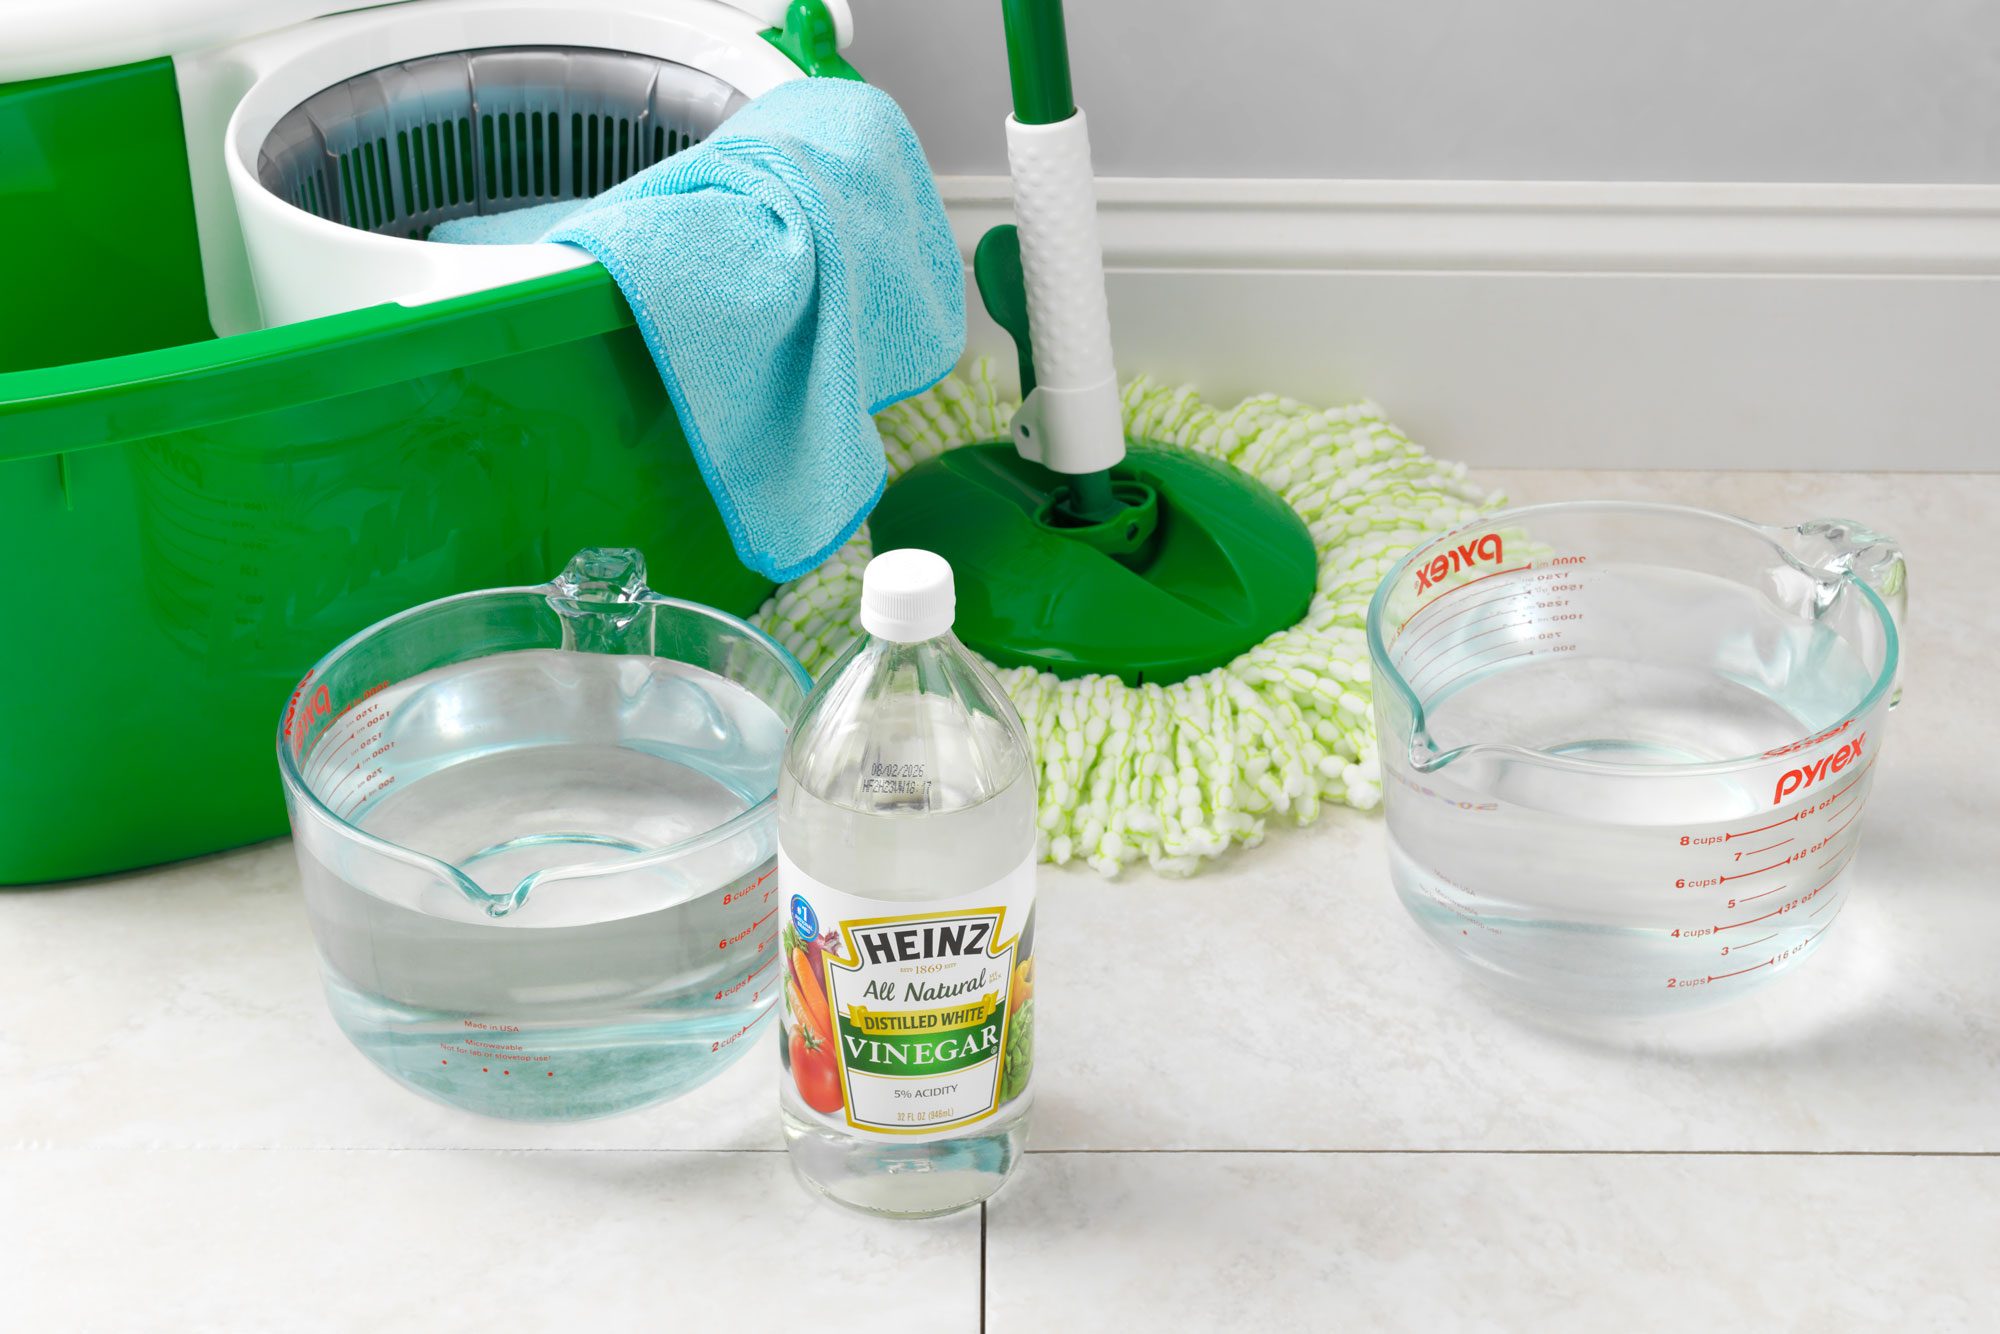 How to Make Homemade Floor Cleaner for Every Floor in Your Home